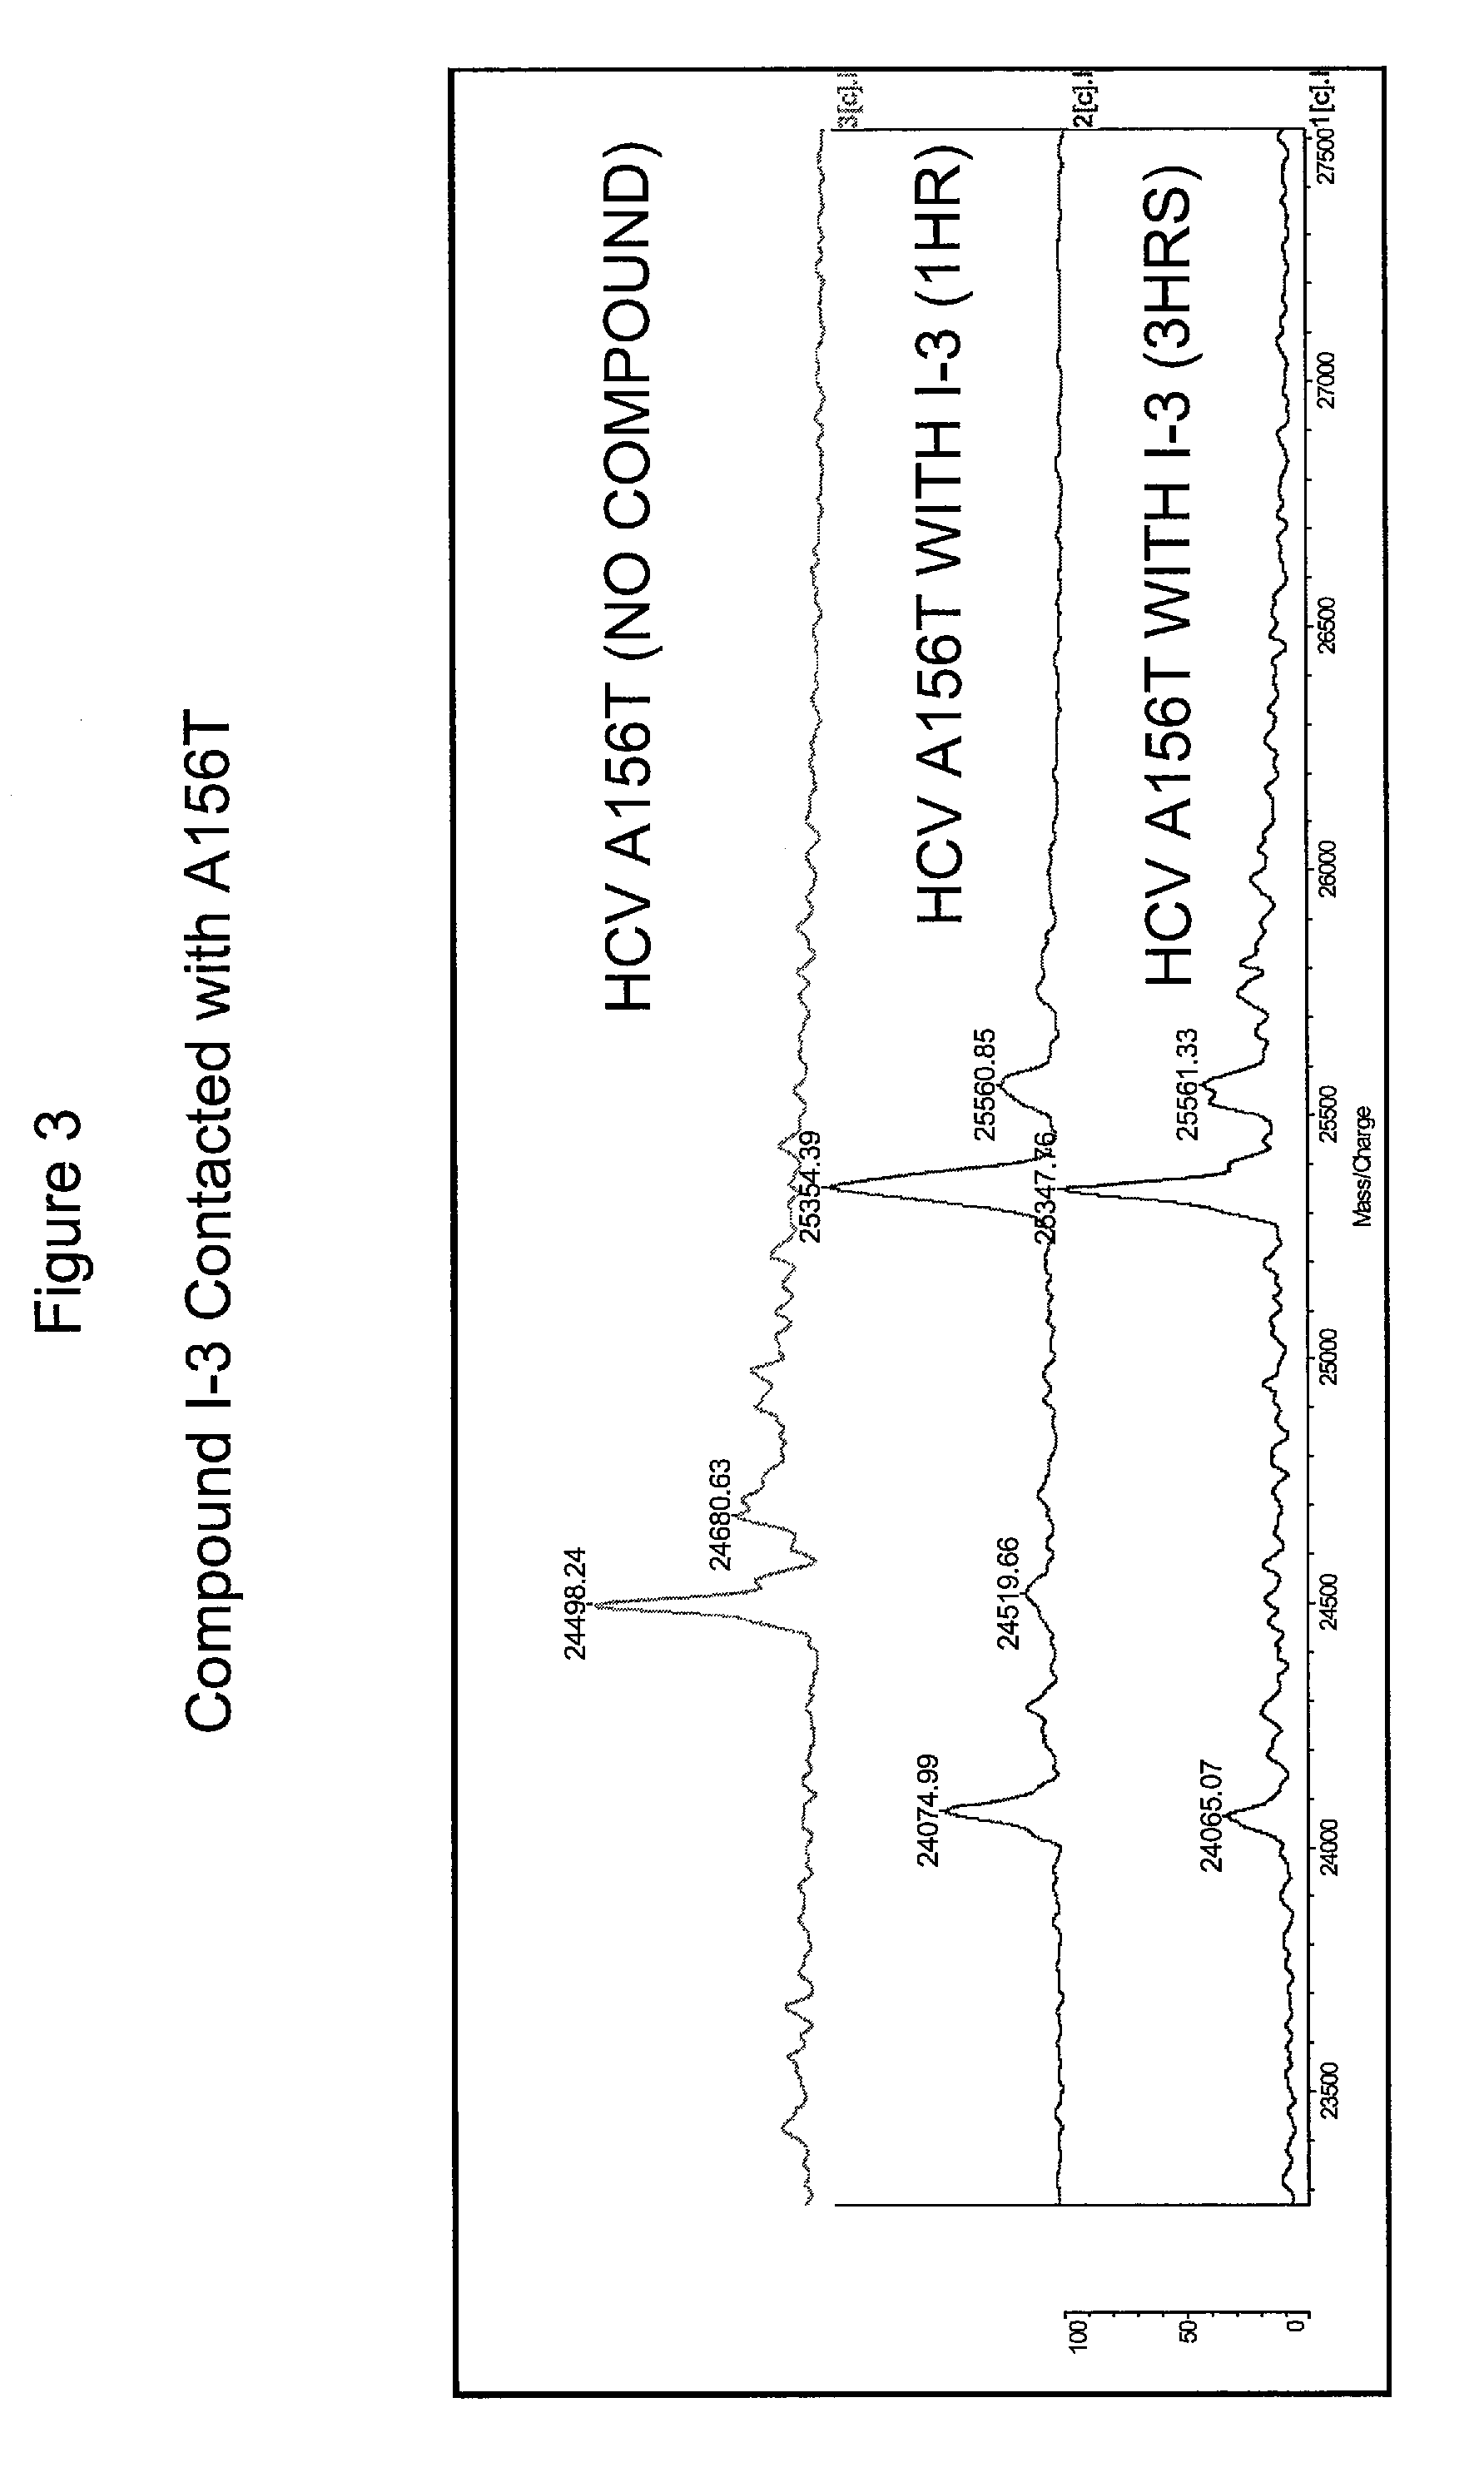 HCV protease inhibitors and uses thereof